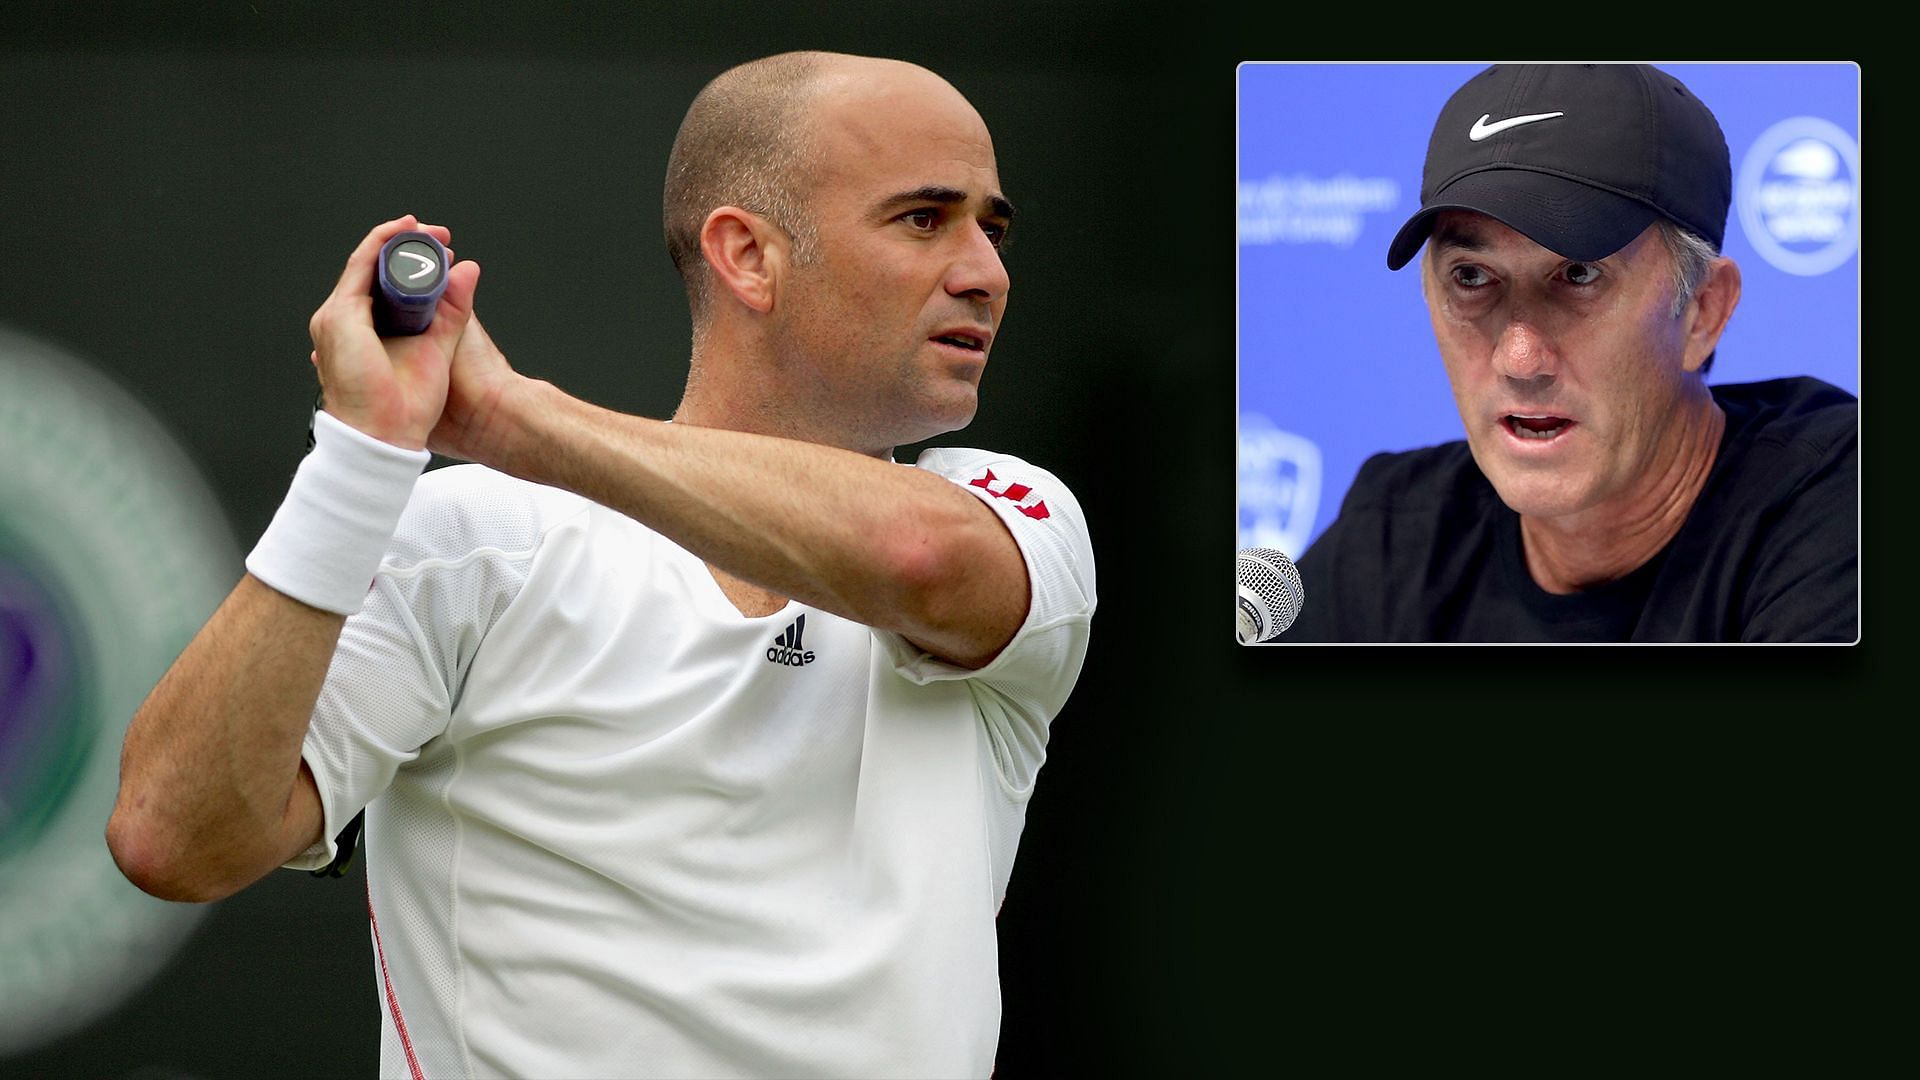 Darren Cahill has praised Andre Agassi for his meticulous thought process.